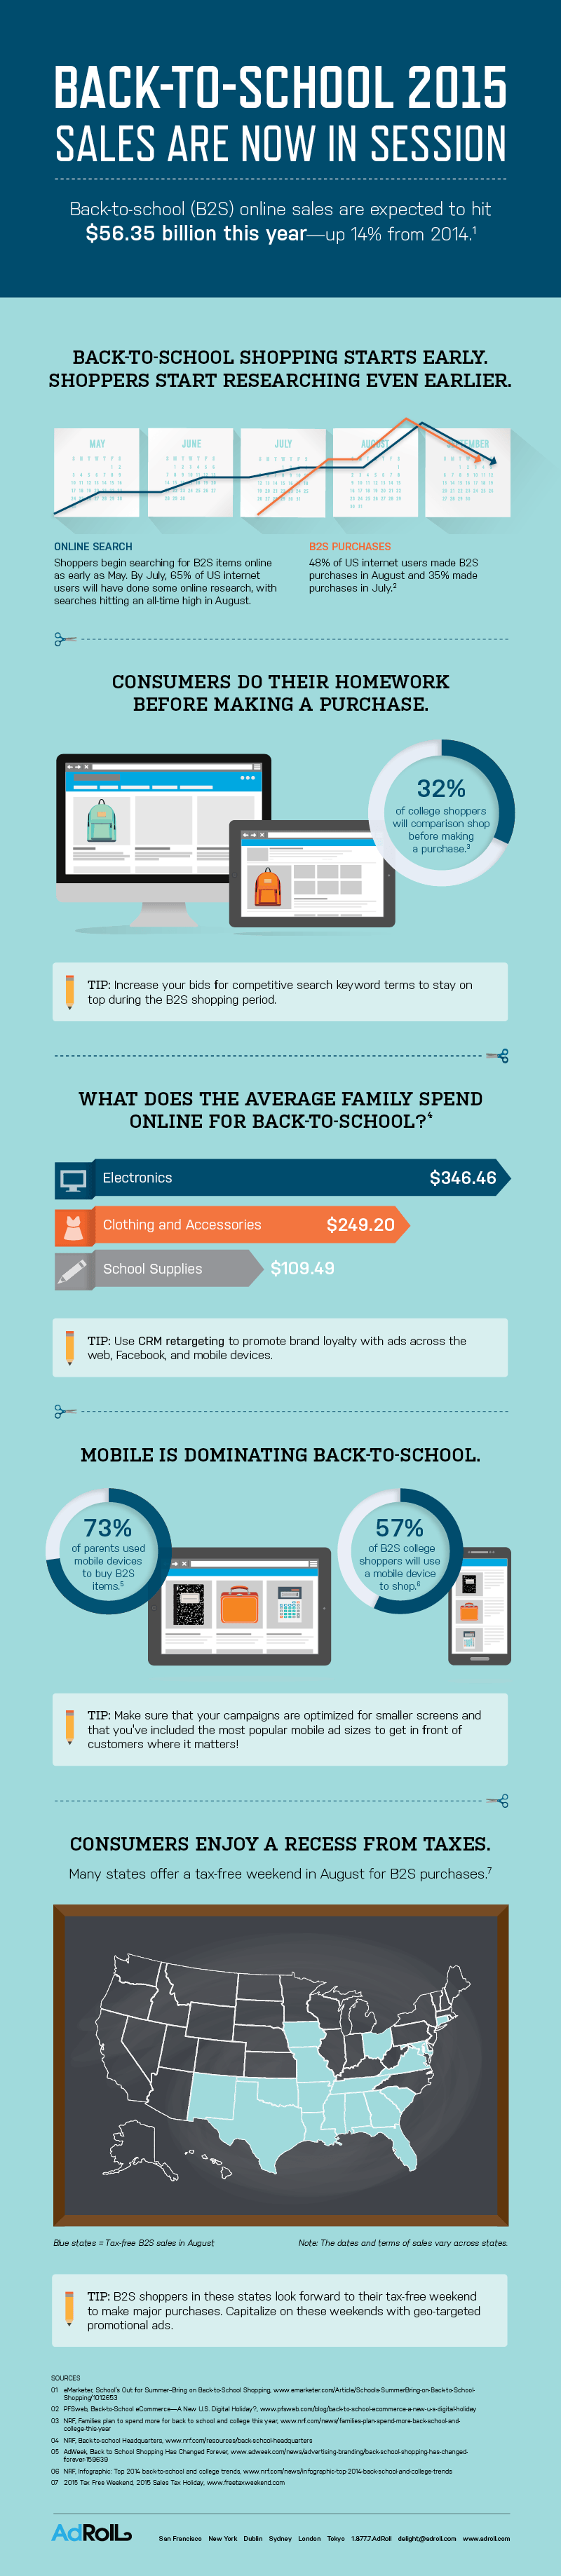 Top 5 Shopping Trends for Back to School 2015 Infographic